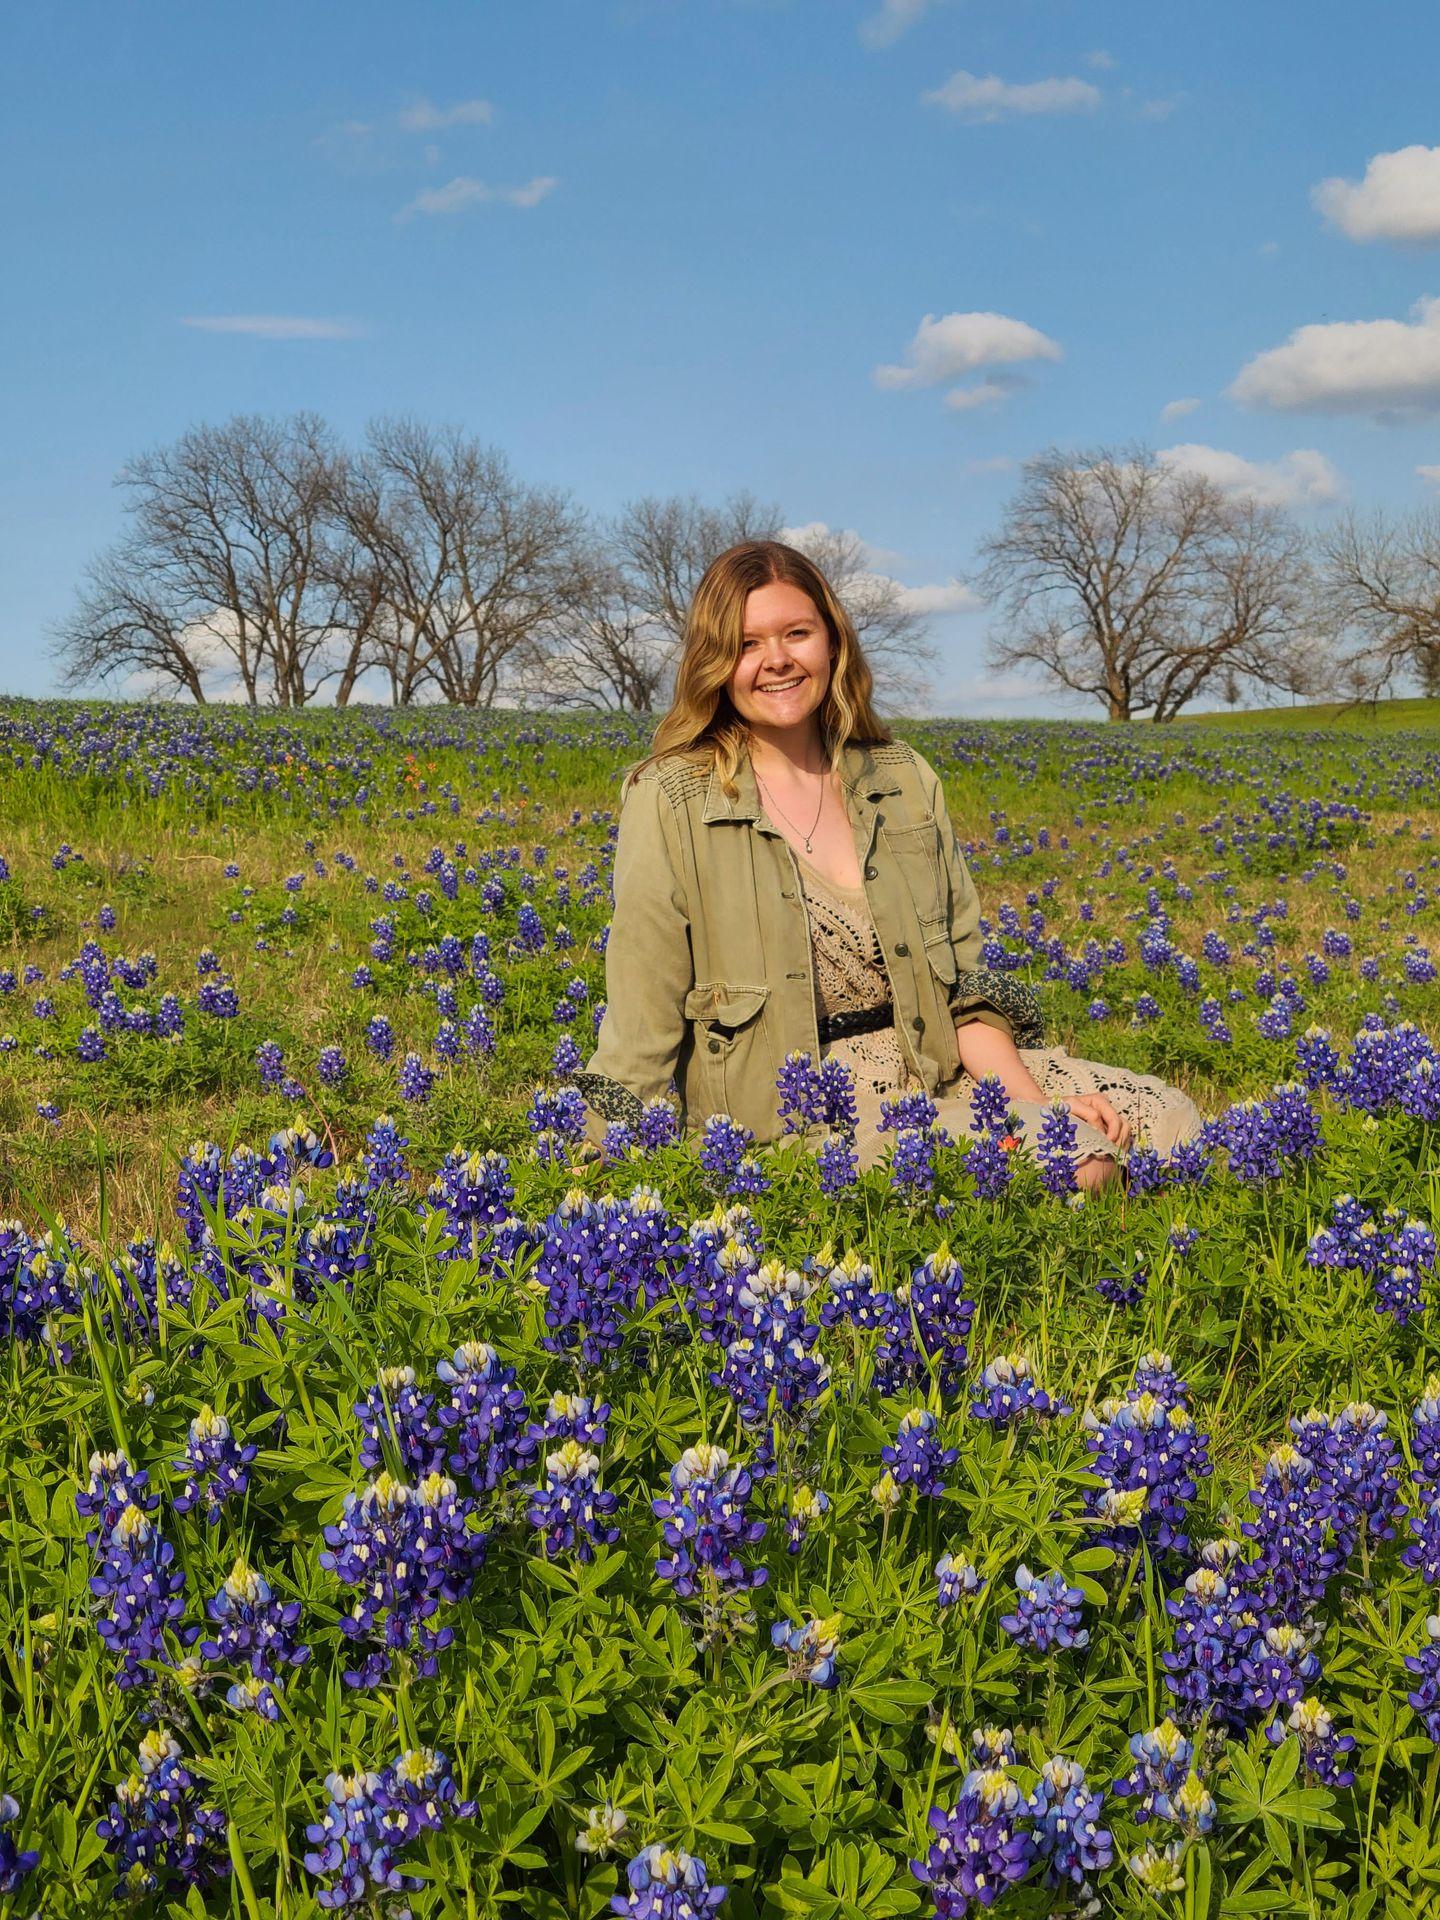 Lydia sitting behind some bluebonnets in a field.